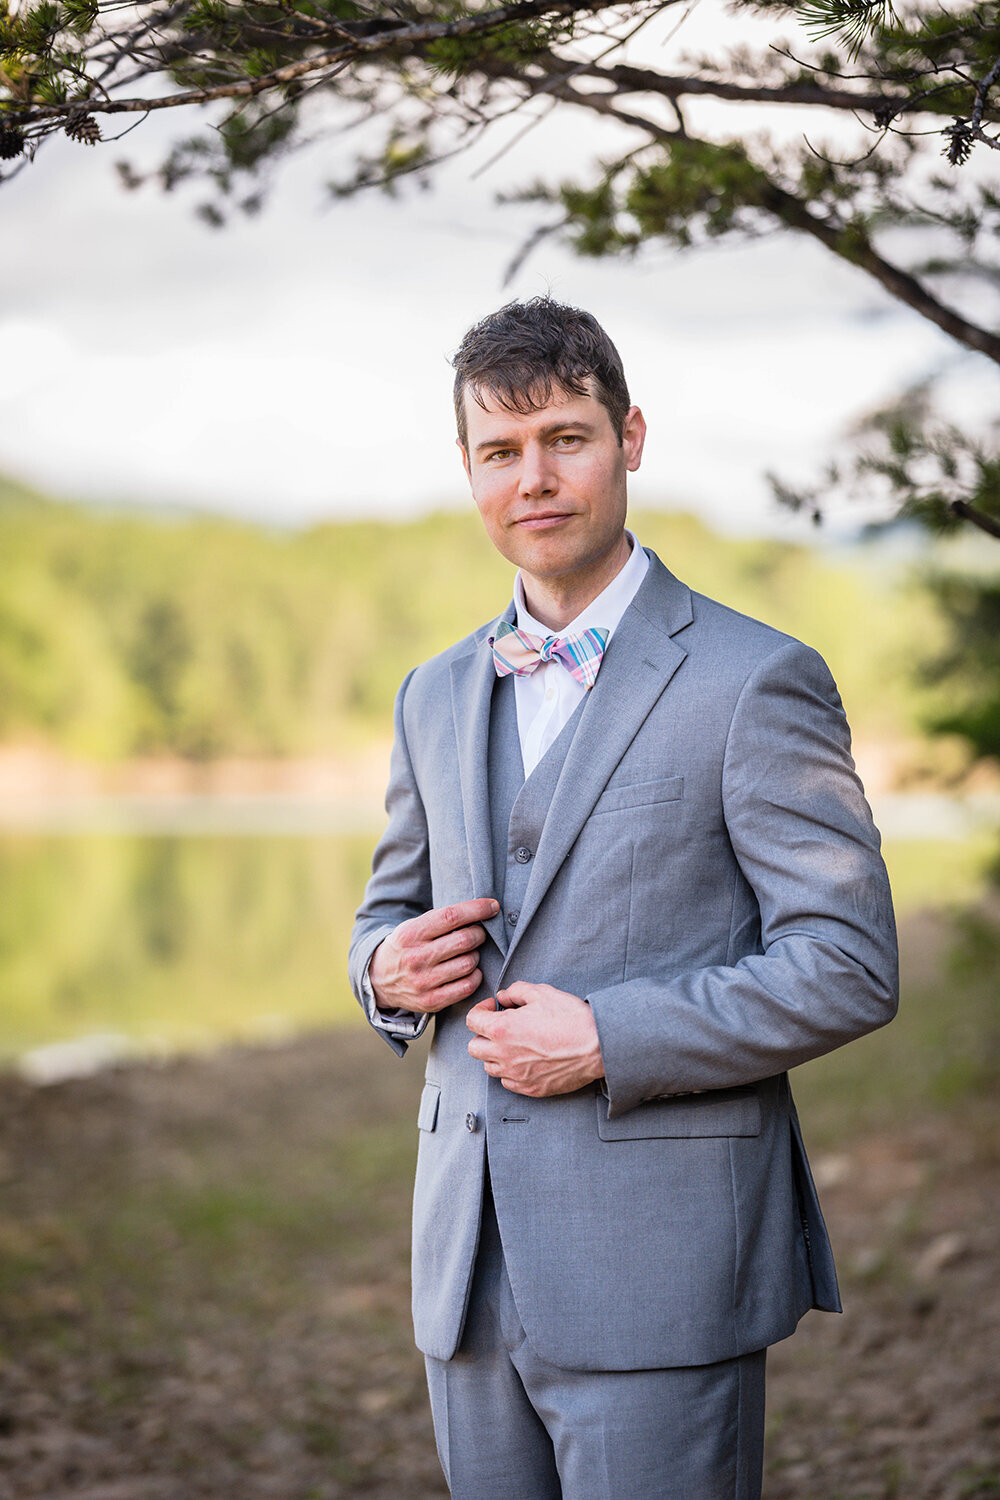 A groom stands along the shores of Carvin’s Cove for a formal portrait on his elopement day. He is wearing an all gray suit and he is grinning while grabbing onto either side of his suit jacket lapel.